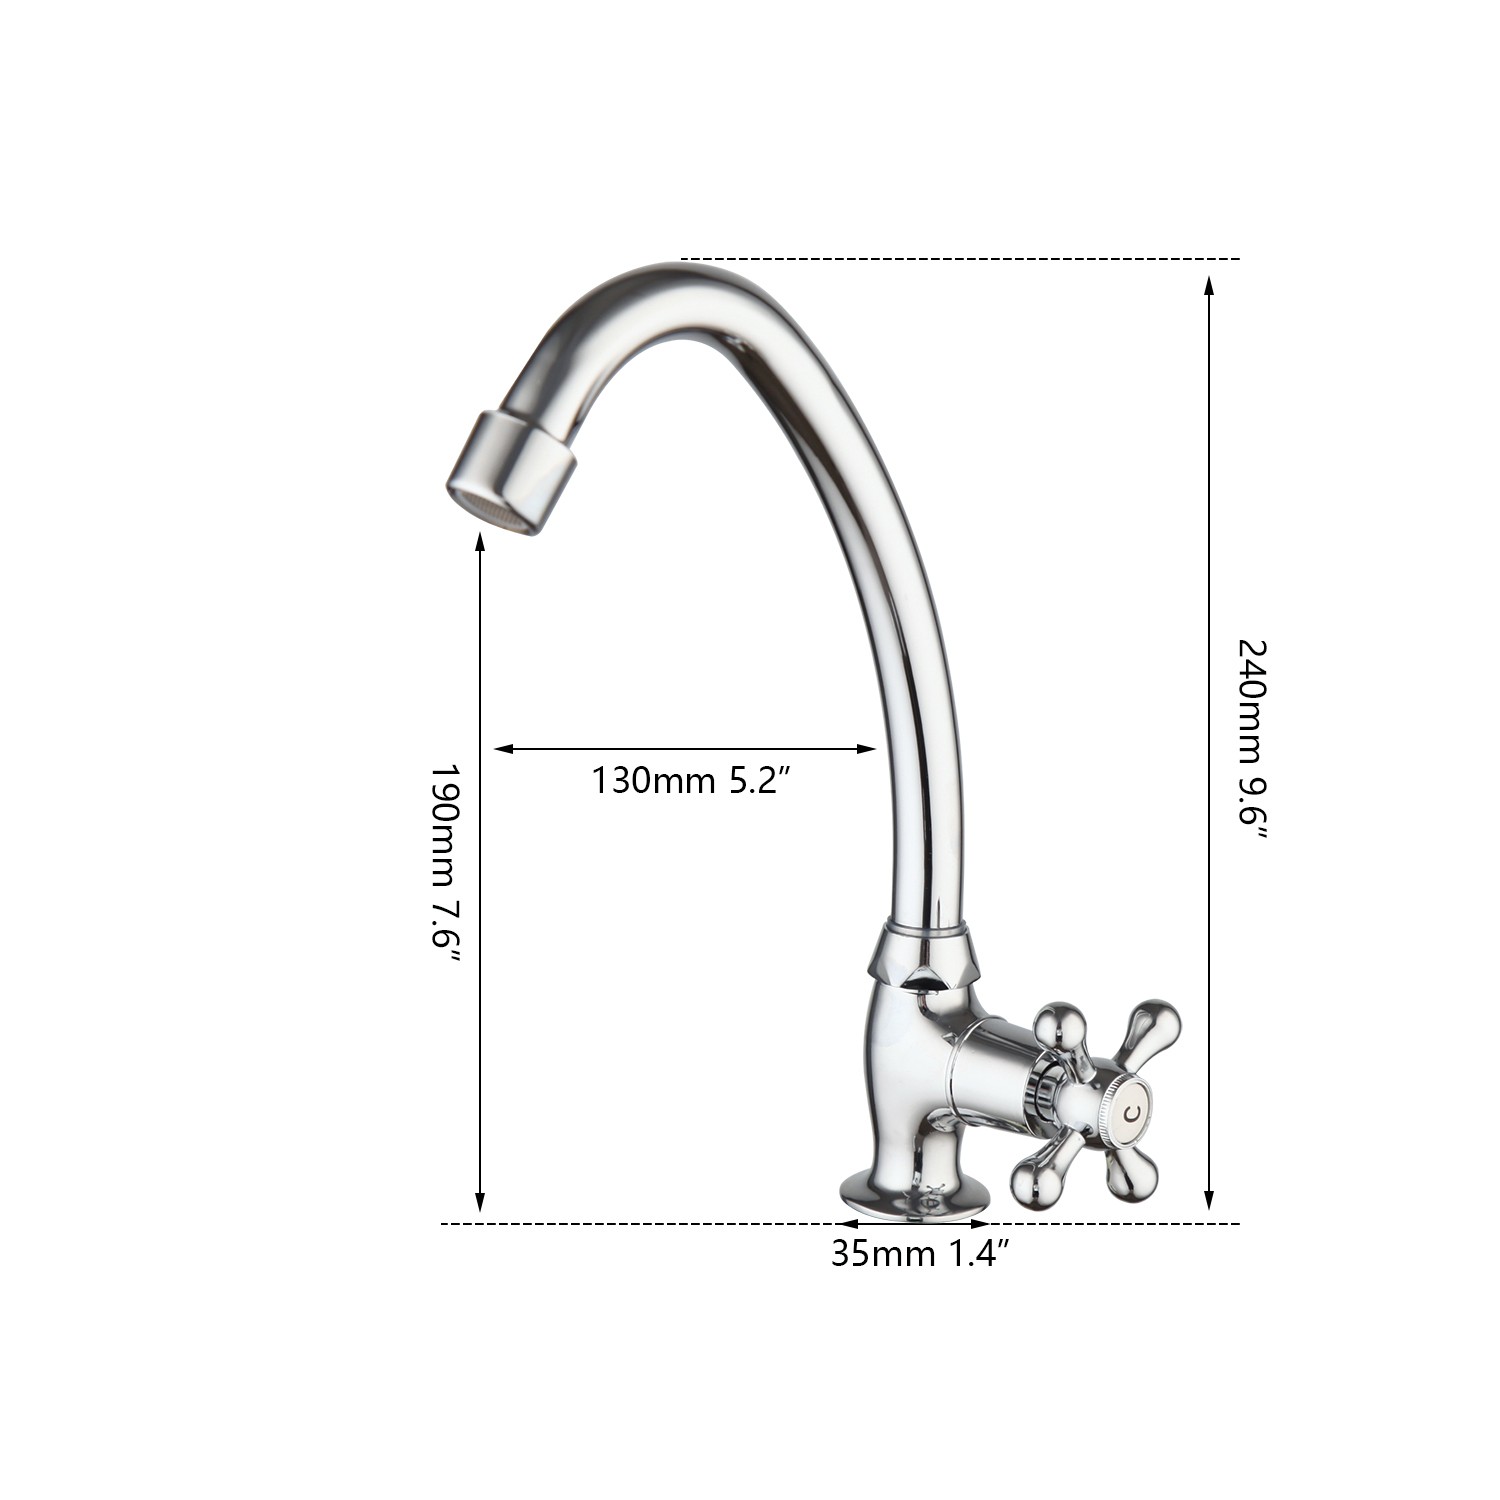 ZAPPO Stainless Steel Kitchen Sink Faucet Only Cold Water Taps Flow 360 Swivel Spout Single Handle Deck Mounted Faucet